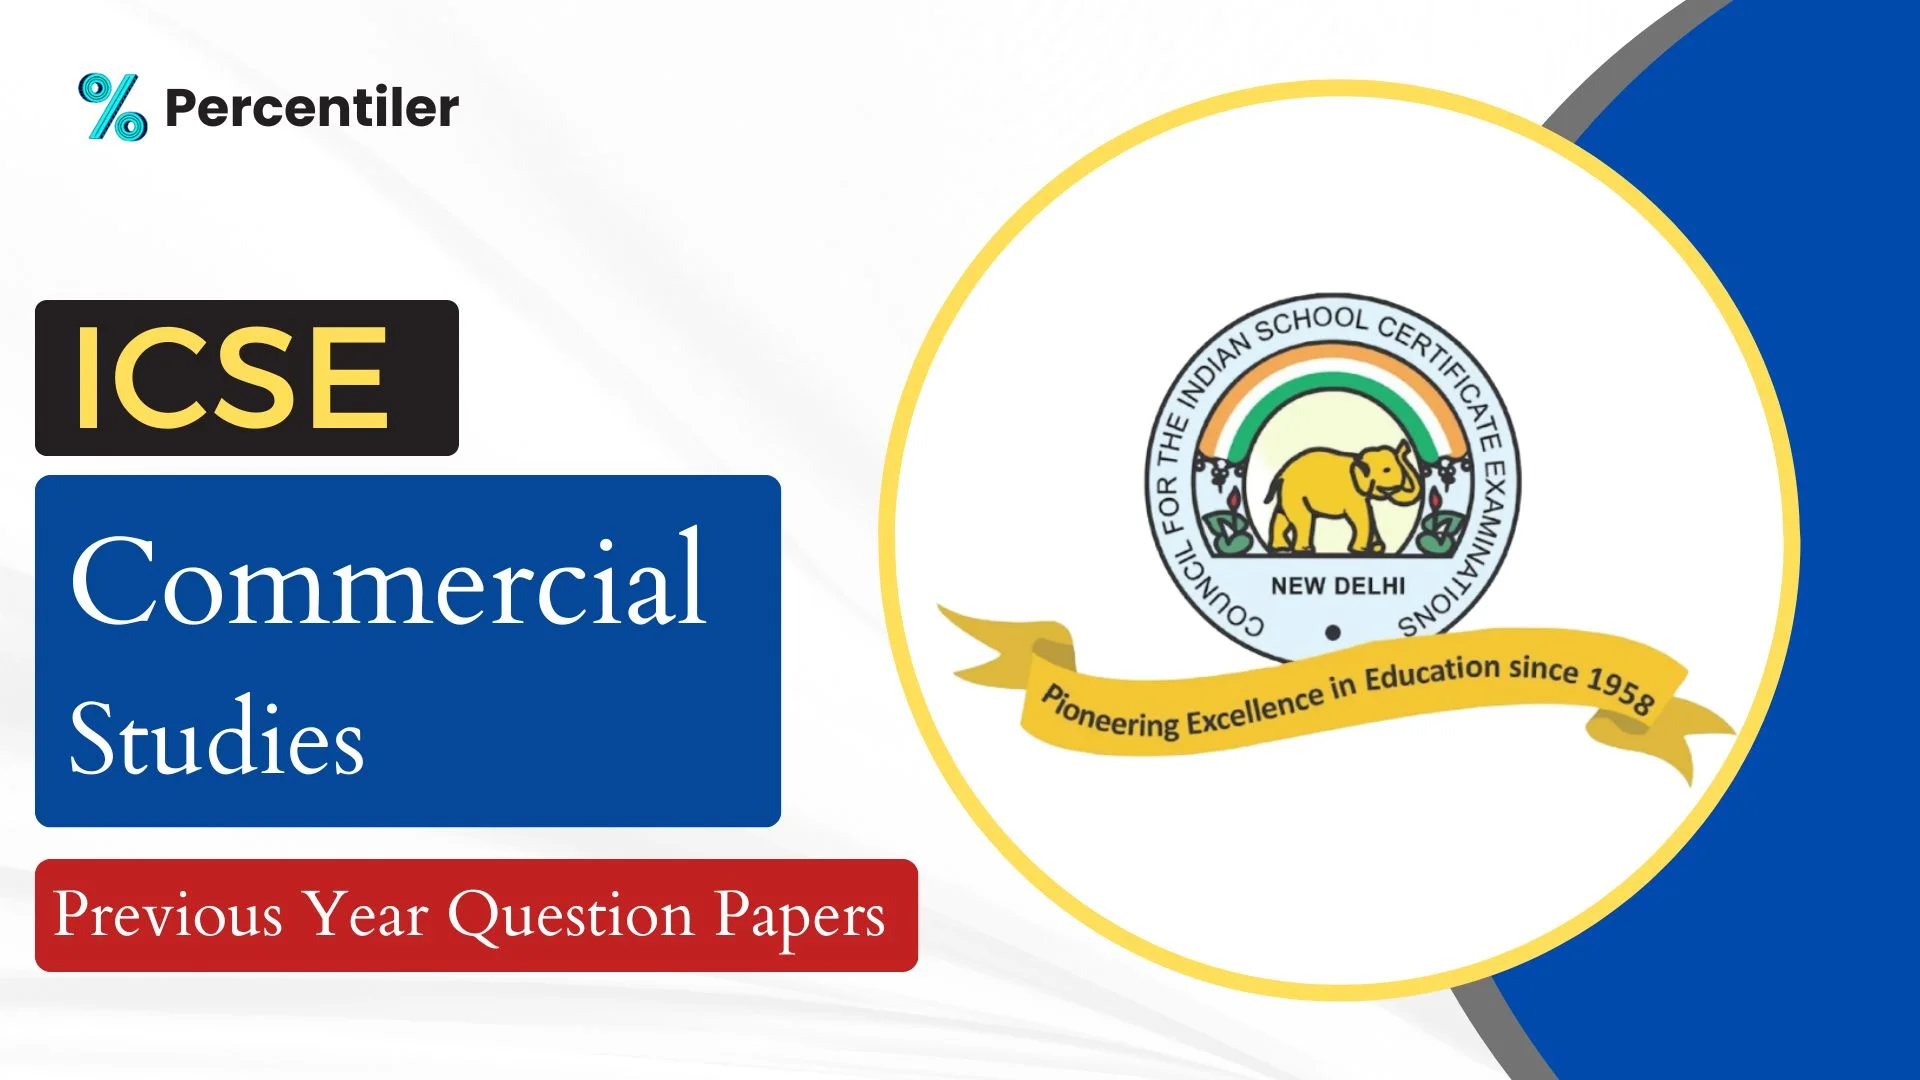 ICSE Commercial Studies Previous Year Question Papers